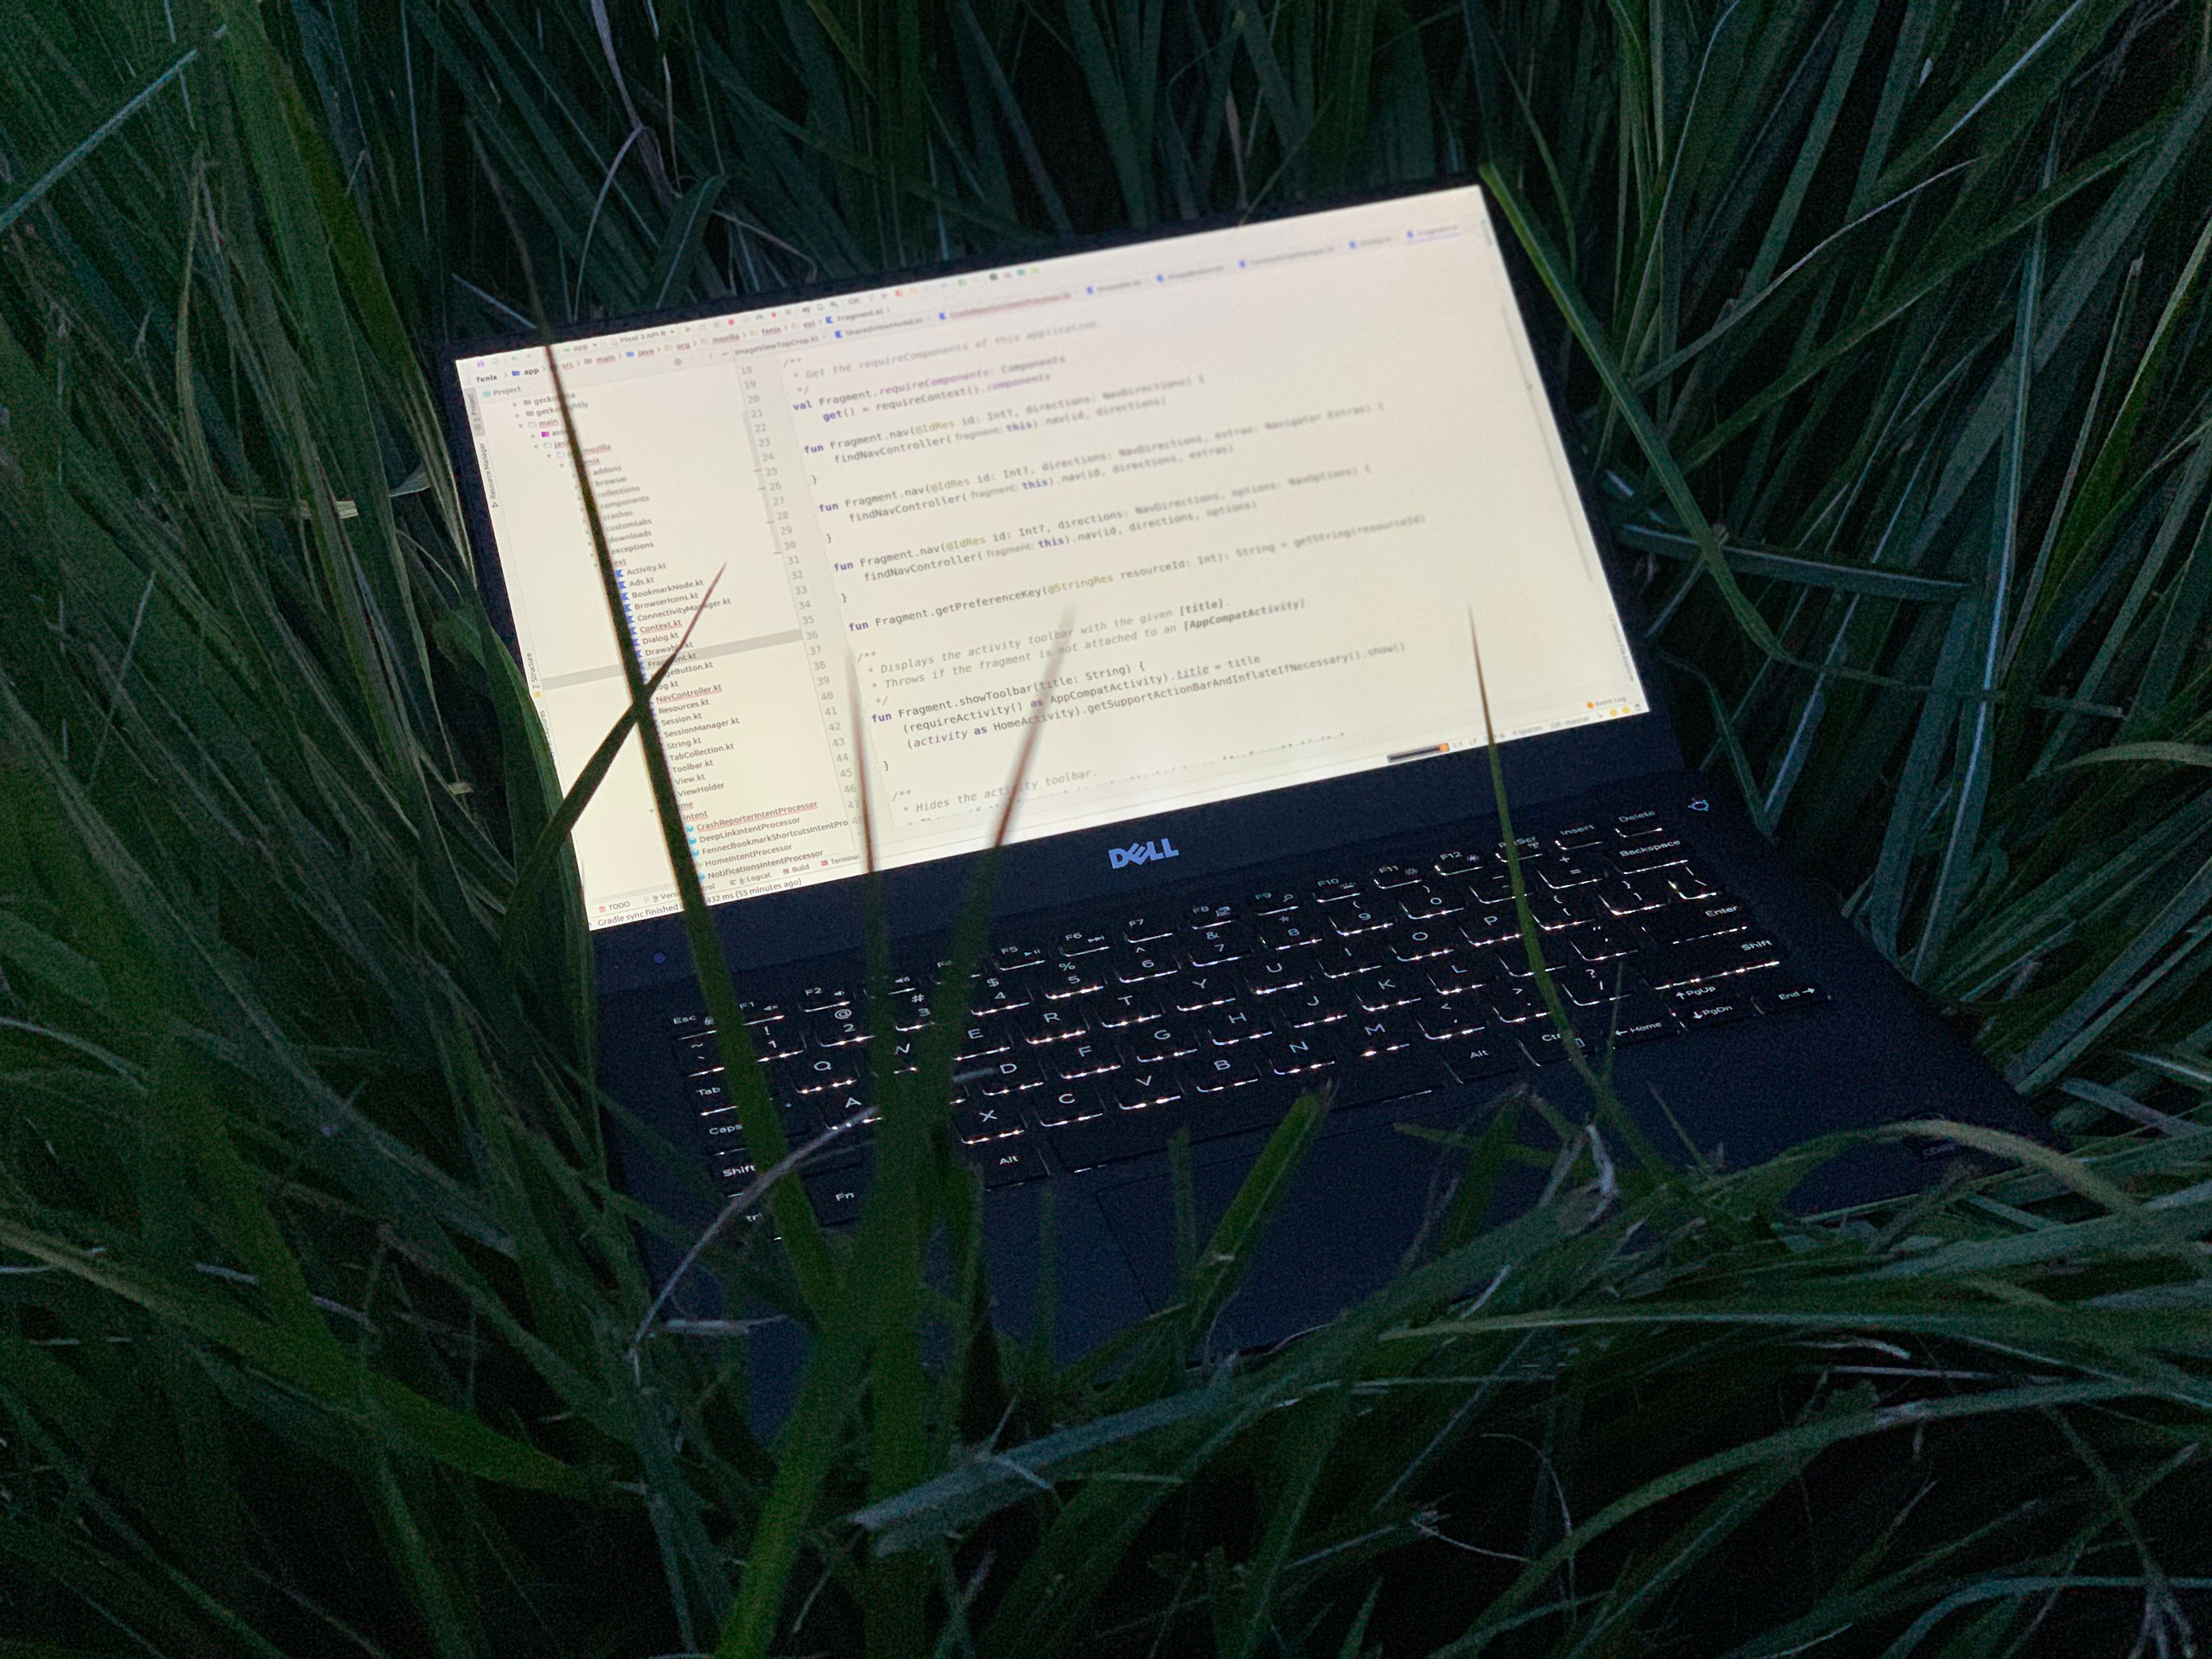 A laptop resting in some deep grass. The laptop is displaying kotlin code from the Firefox Fenix project.